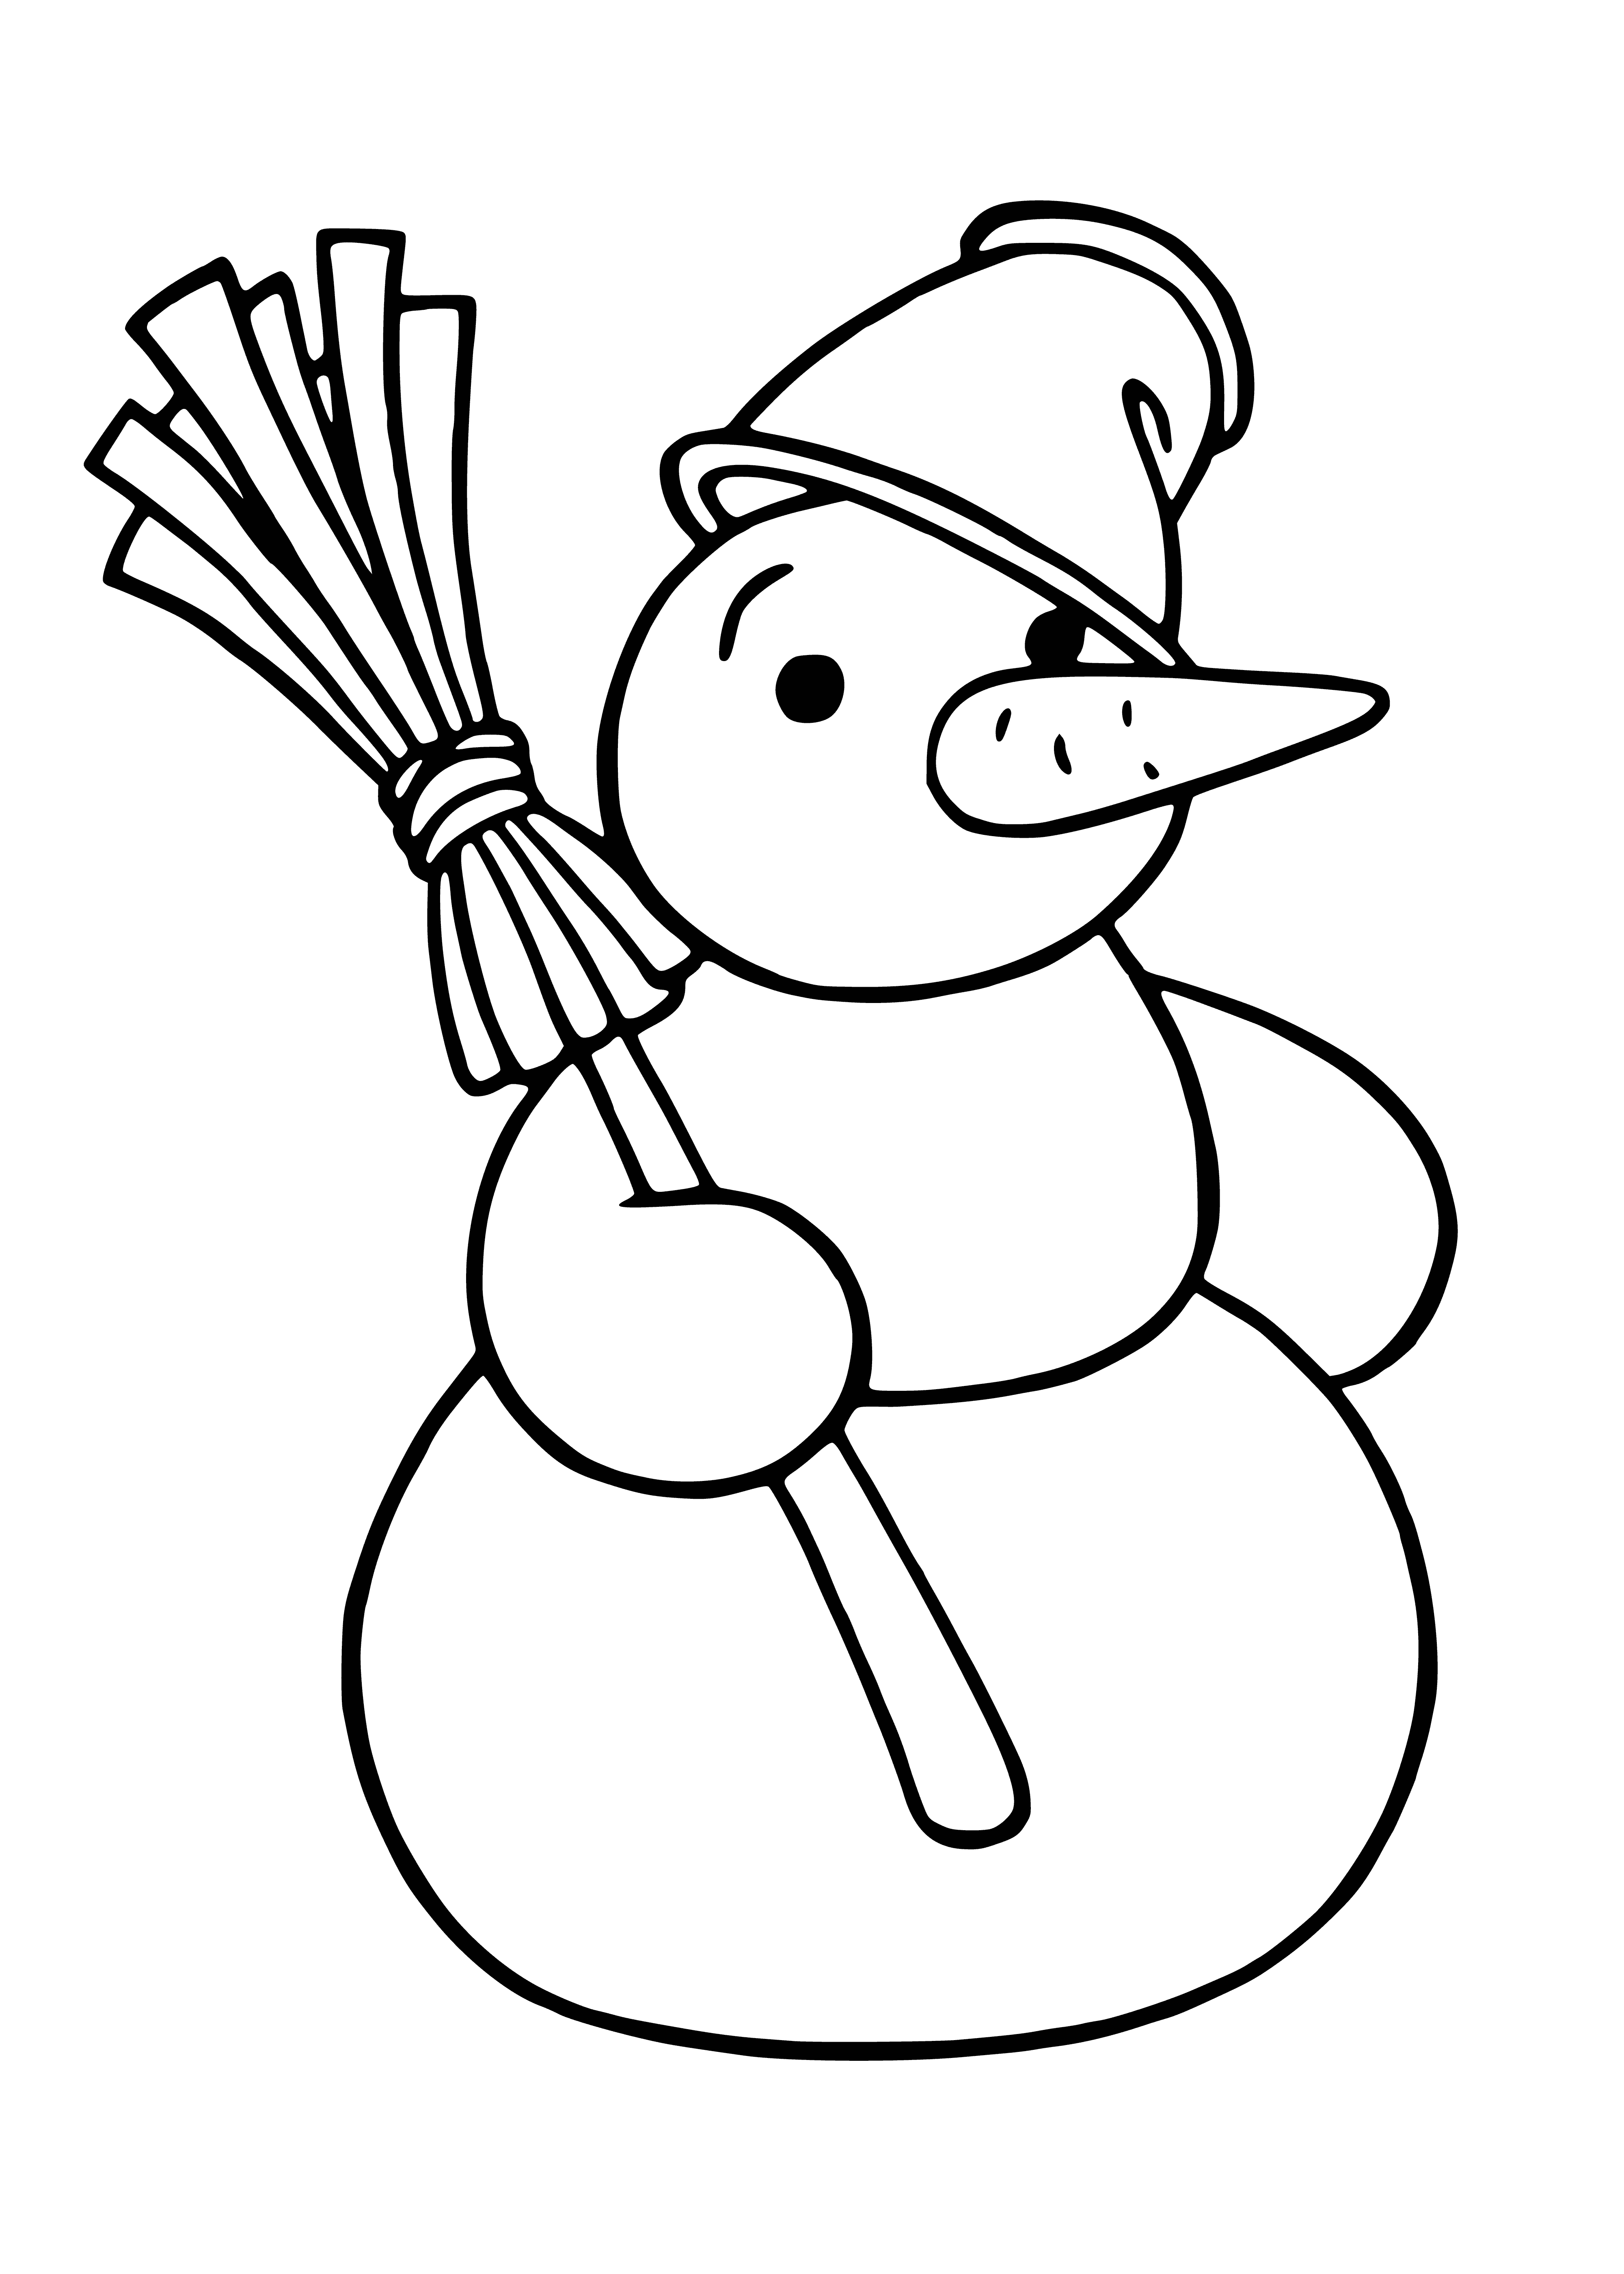 coloring page: Snowman has carrot nose, coal eyes & mouth, red scarf, & twig arms.